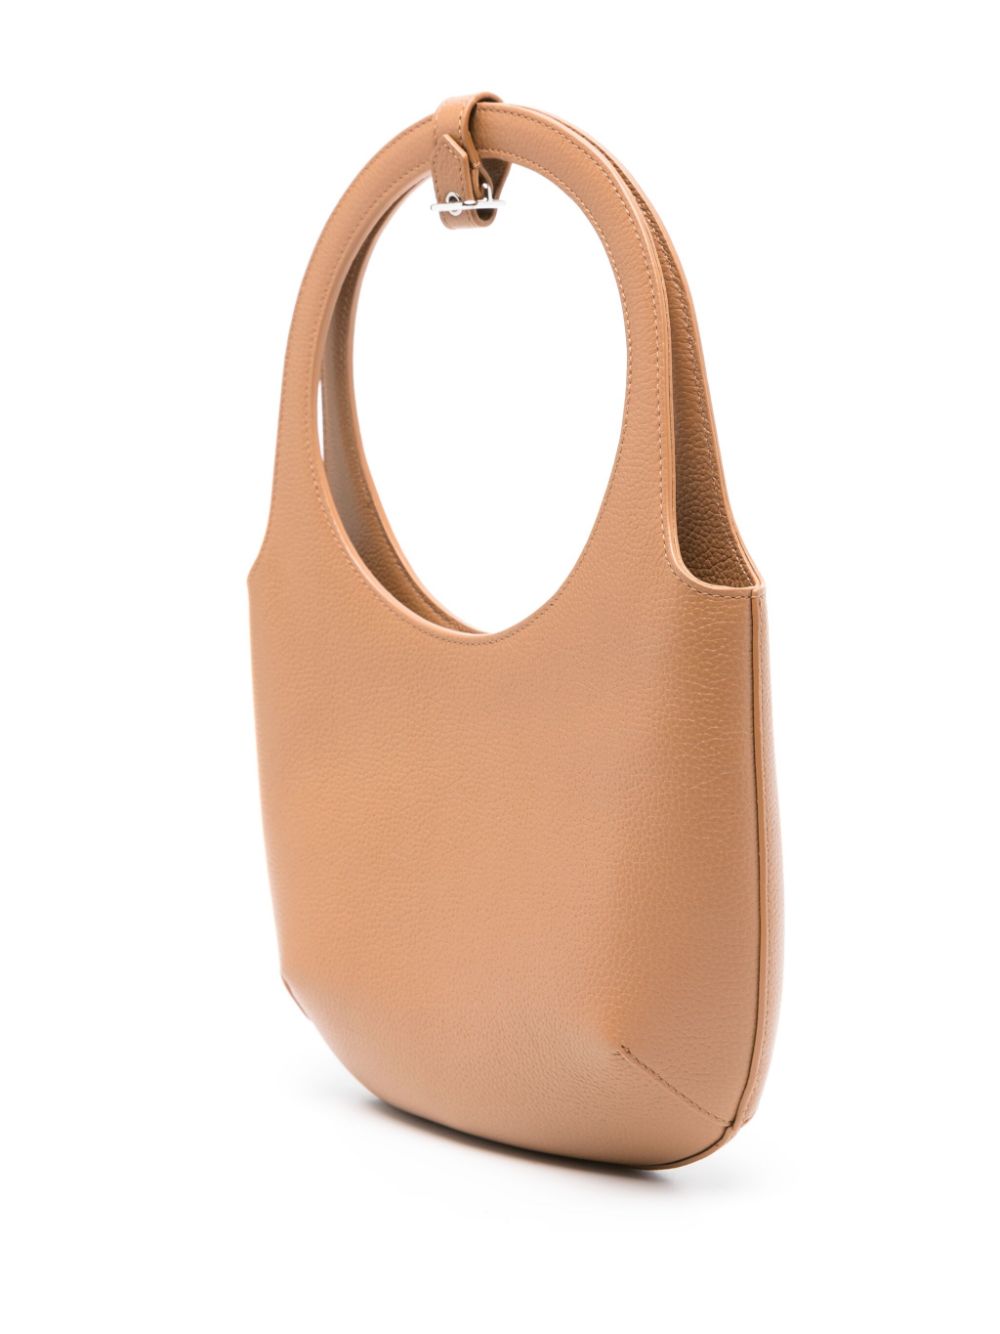 Holy leather tote bag<BR/><BR/>